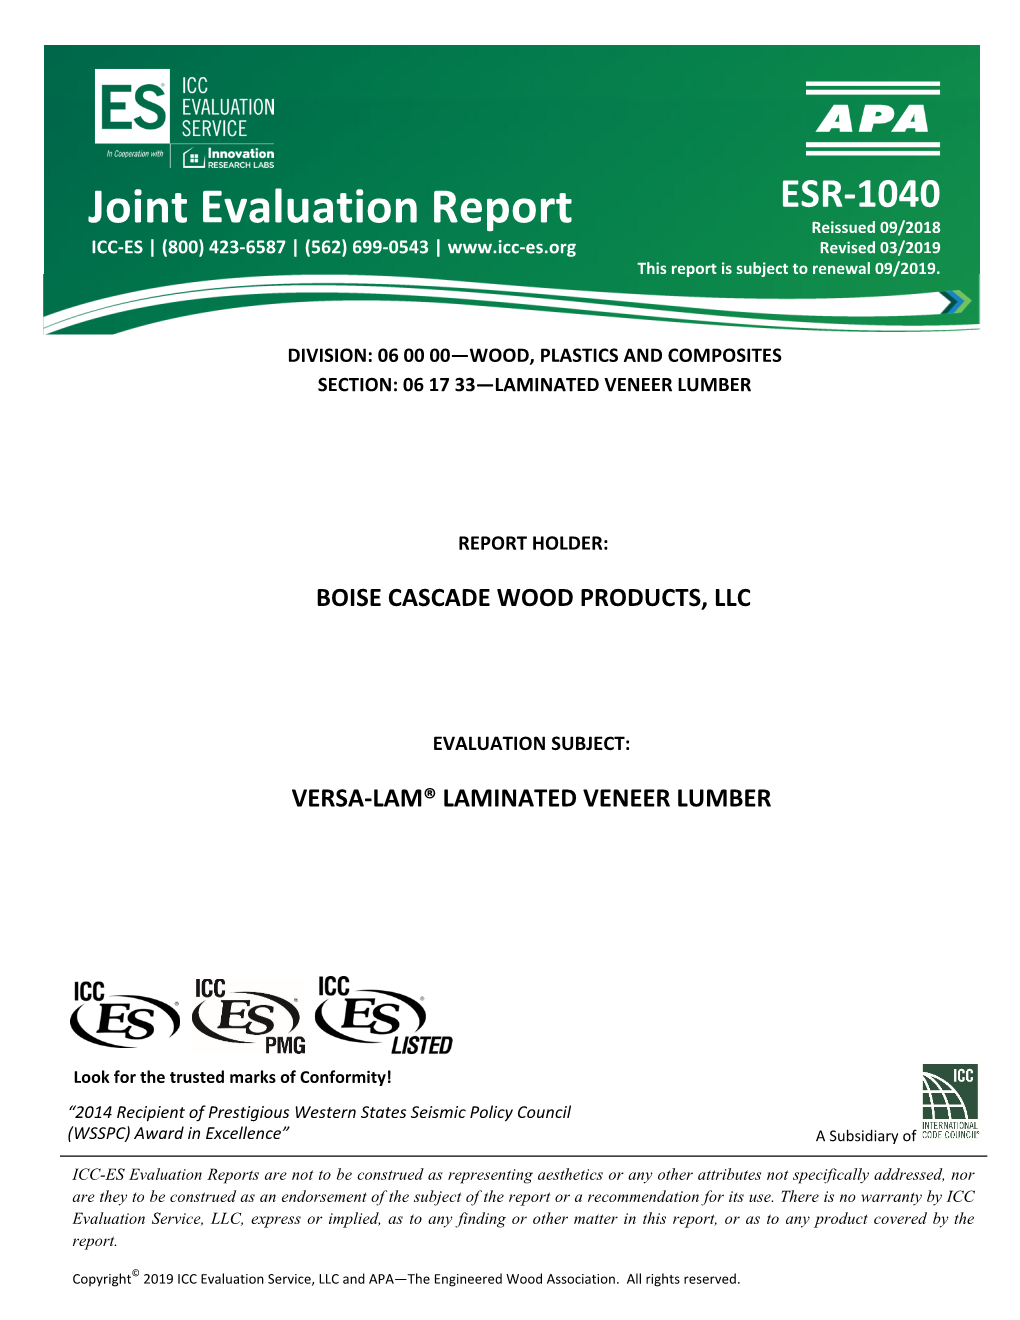 ESR-1040 Reissued September 2018 Revised March 2019 This Report Is Subject to Renewal September 2019